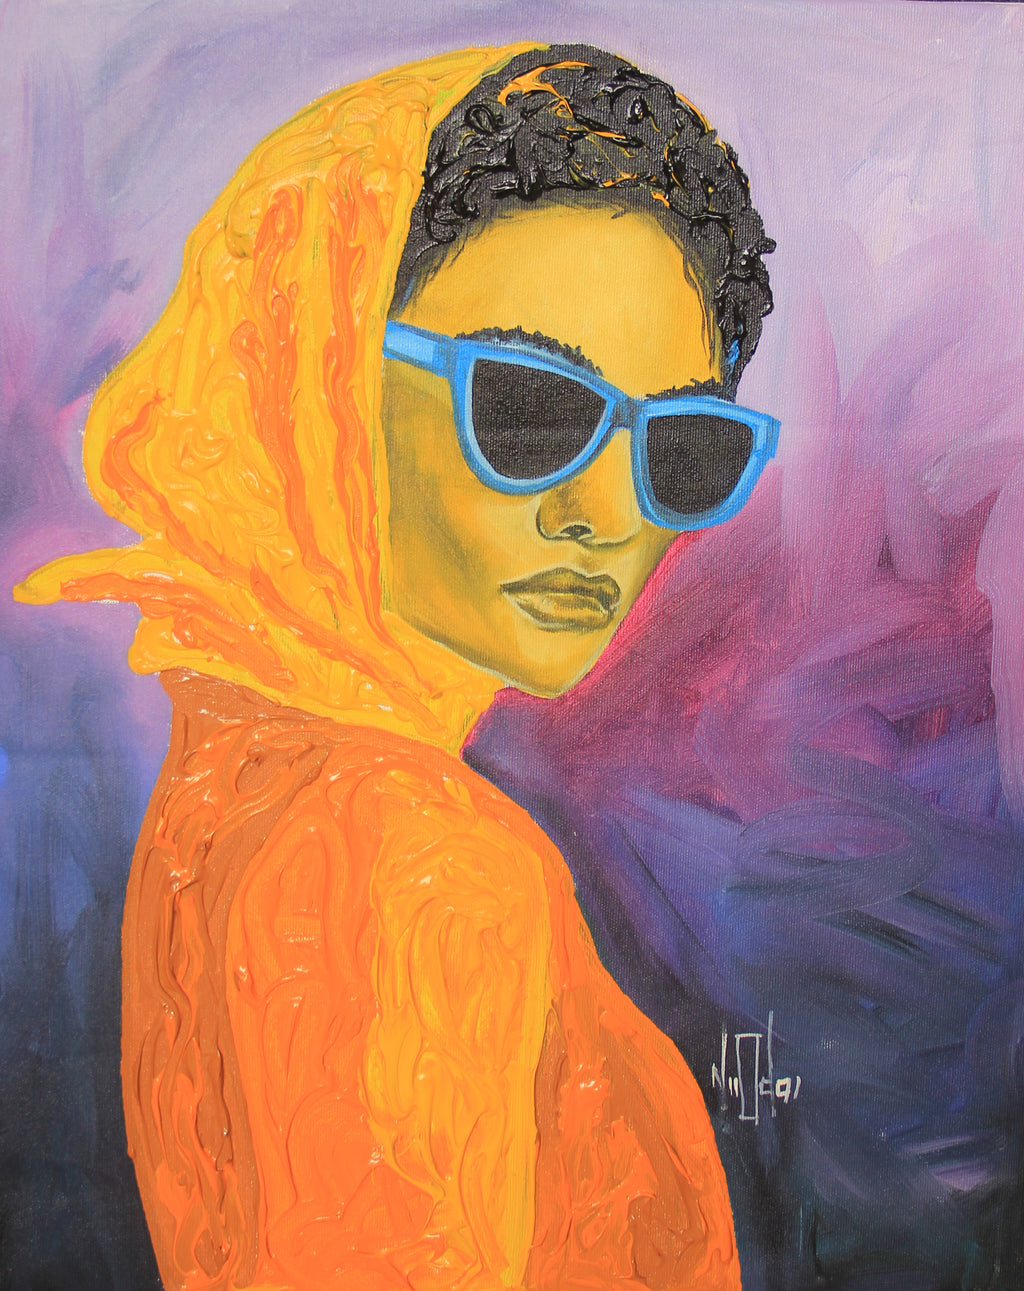 acrylic painting of a black woman with orange scarf and top, blue sunglasses and purple background